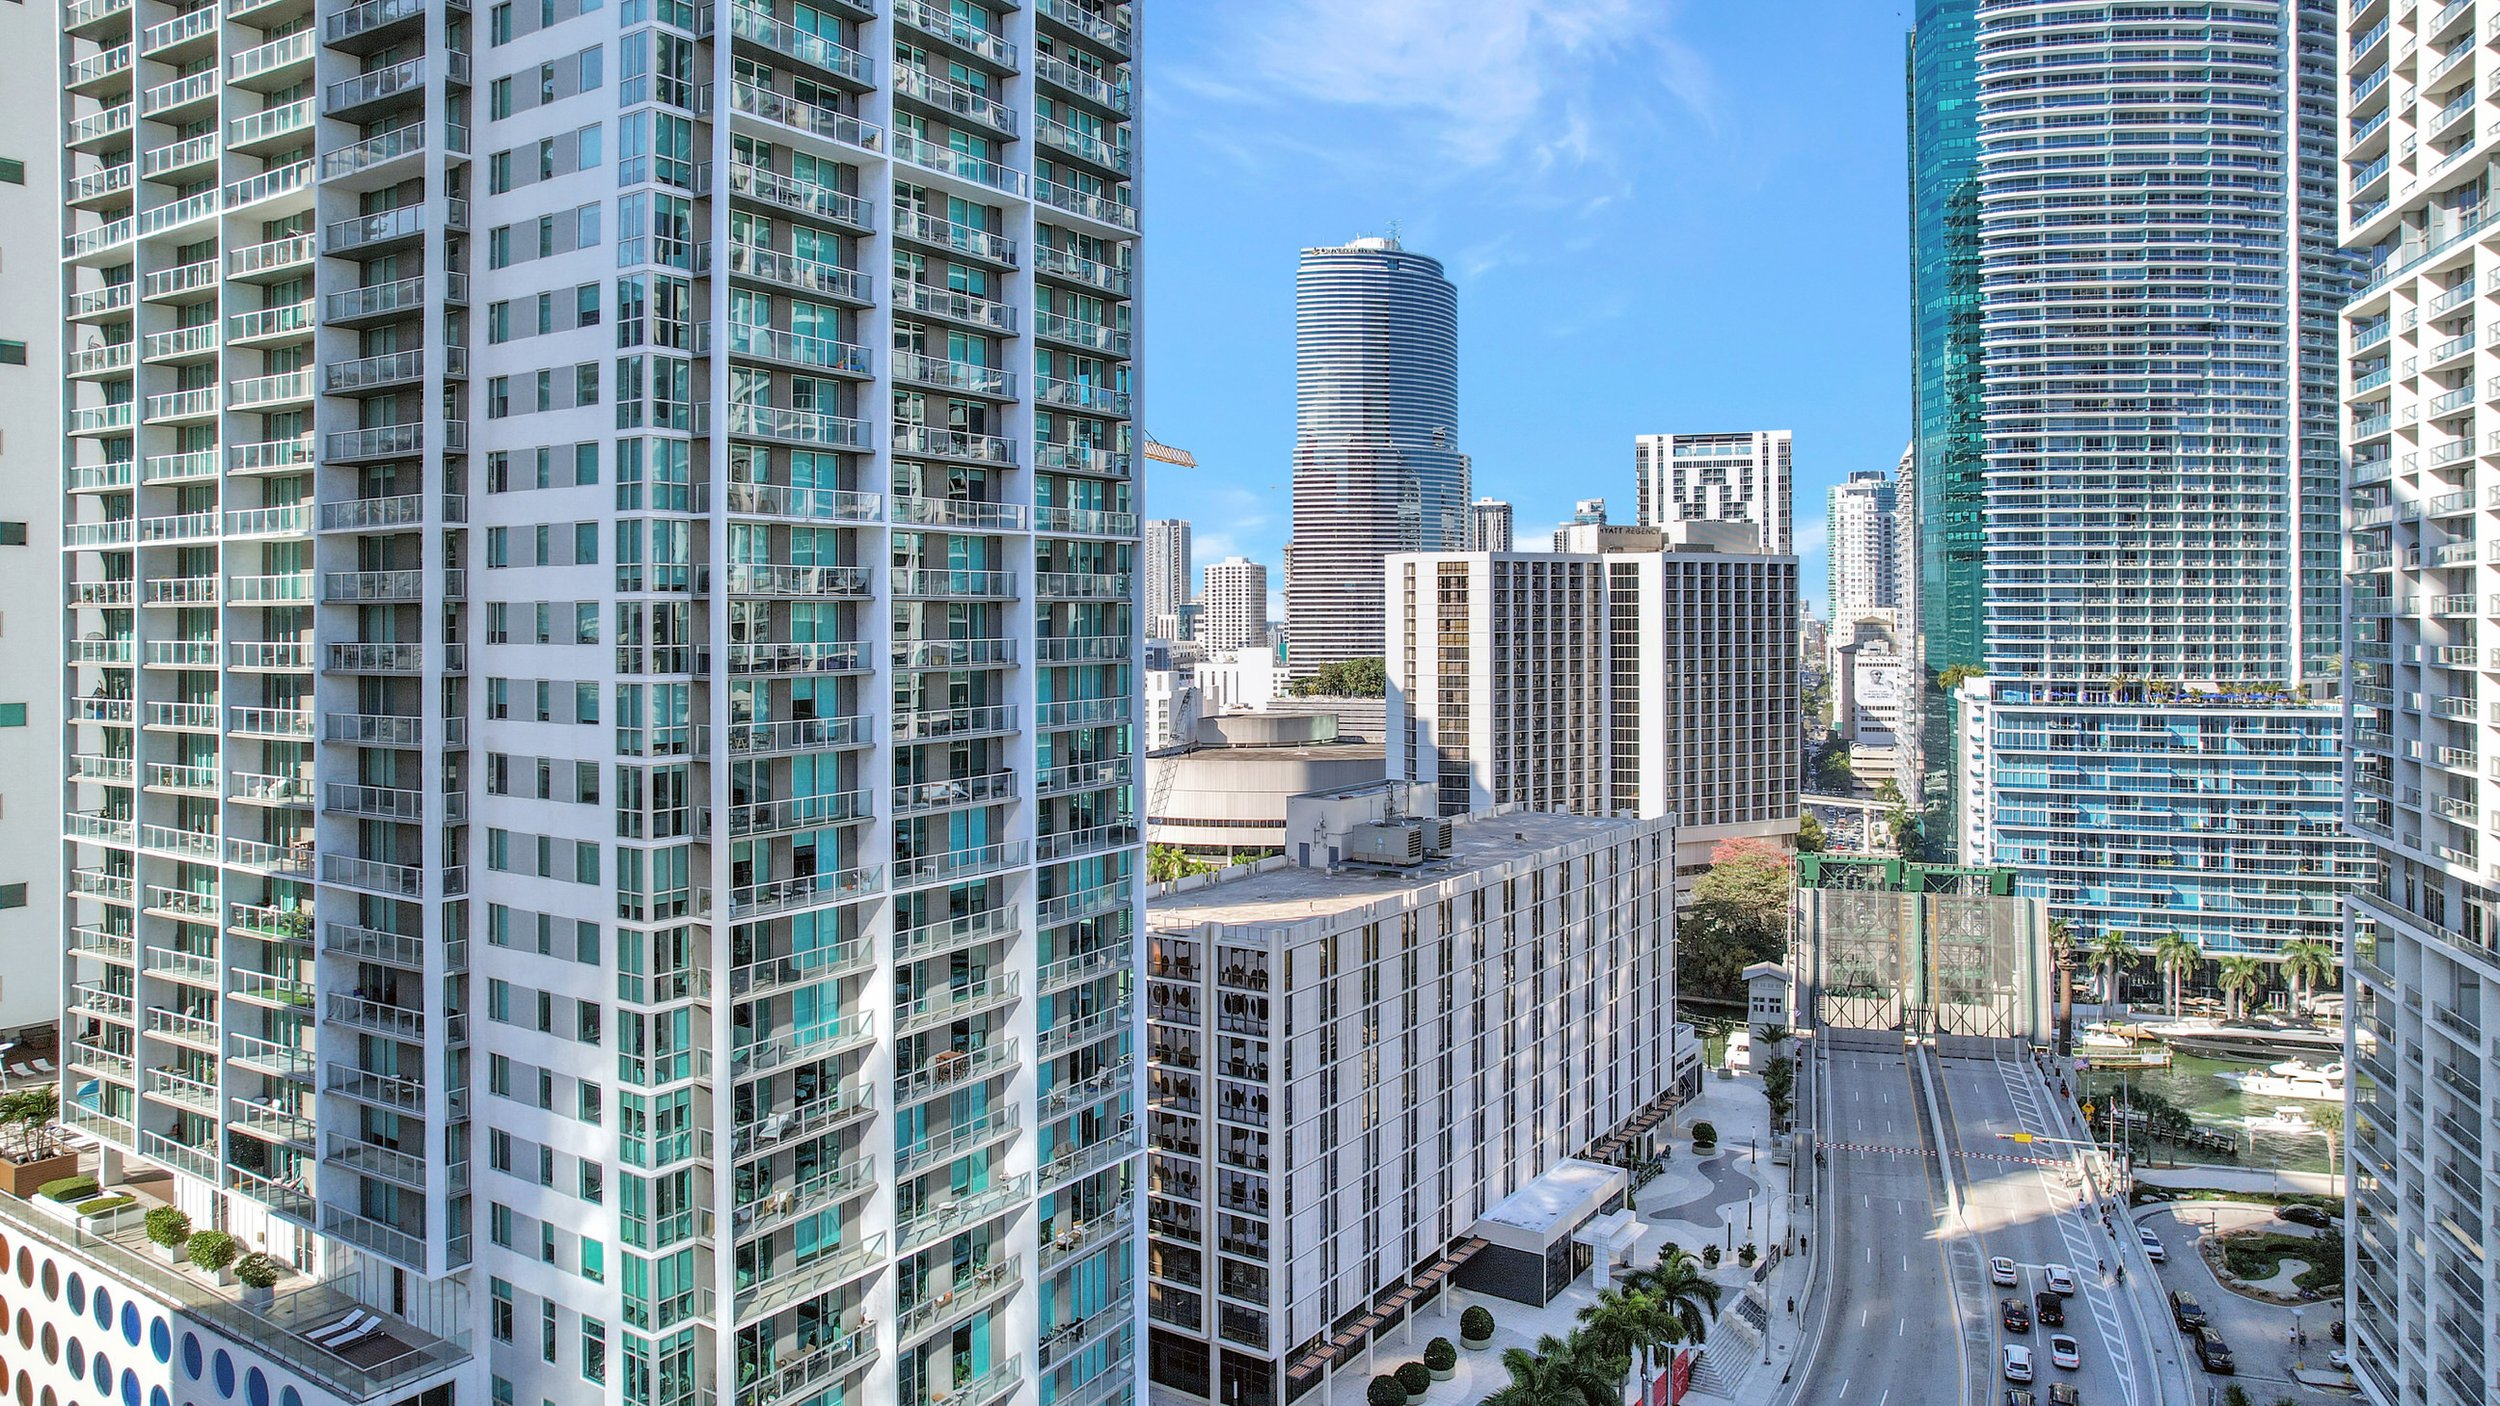 Check Out This Two-Bedroom Condo For Under $900K In Brickell 57.jpg